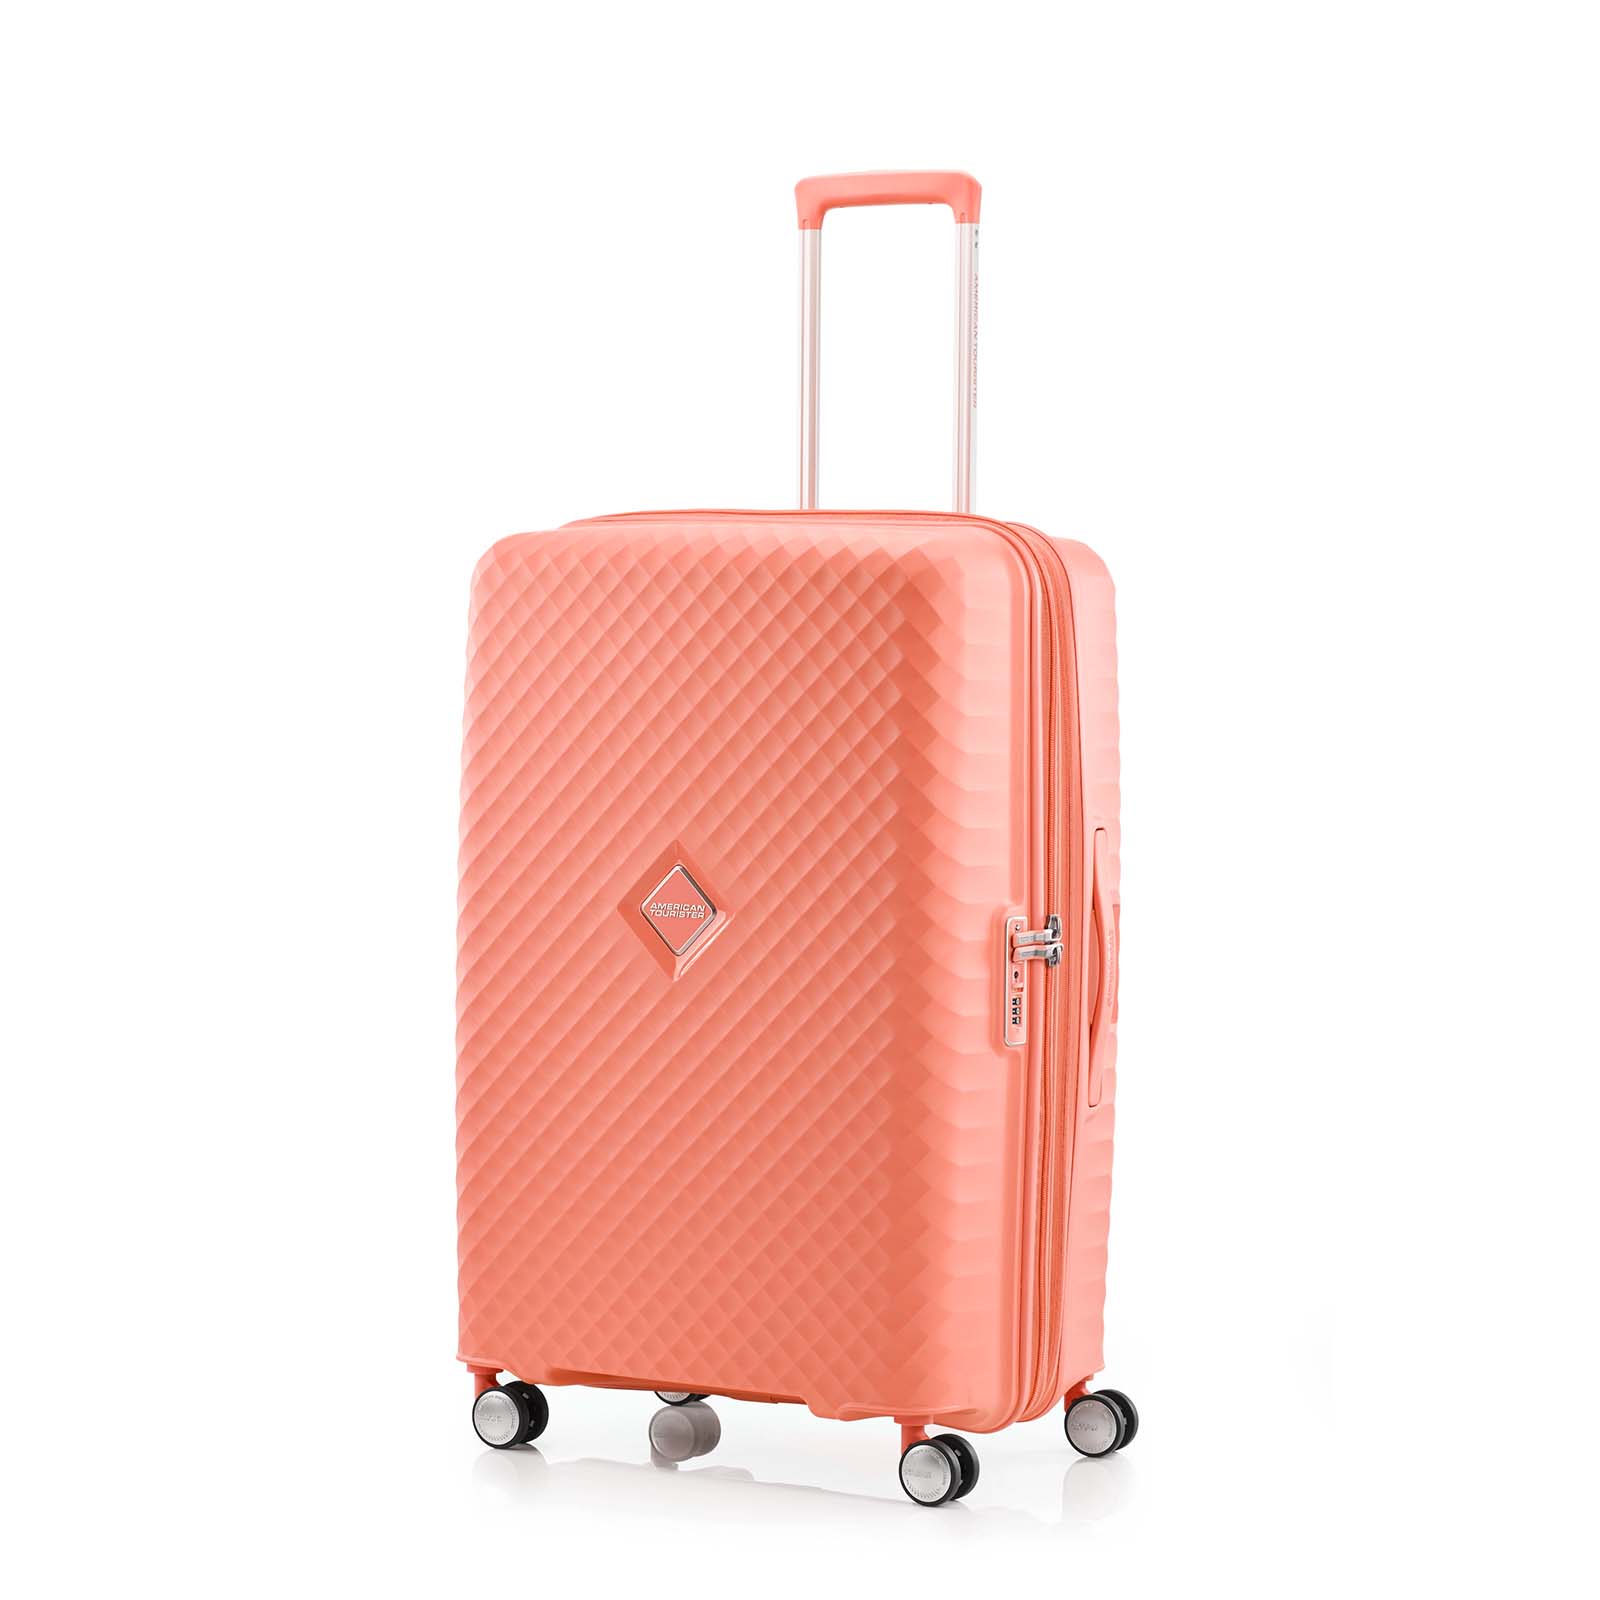 American-Tourister-Squasem-75cm-Suitcase-Bright-Coral-Front-Angle